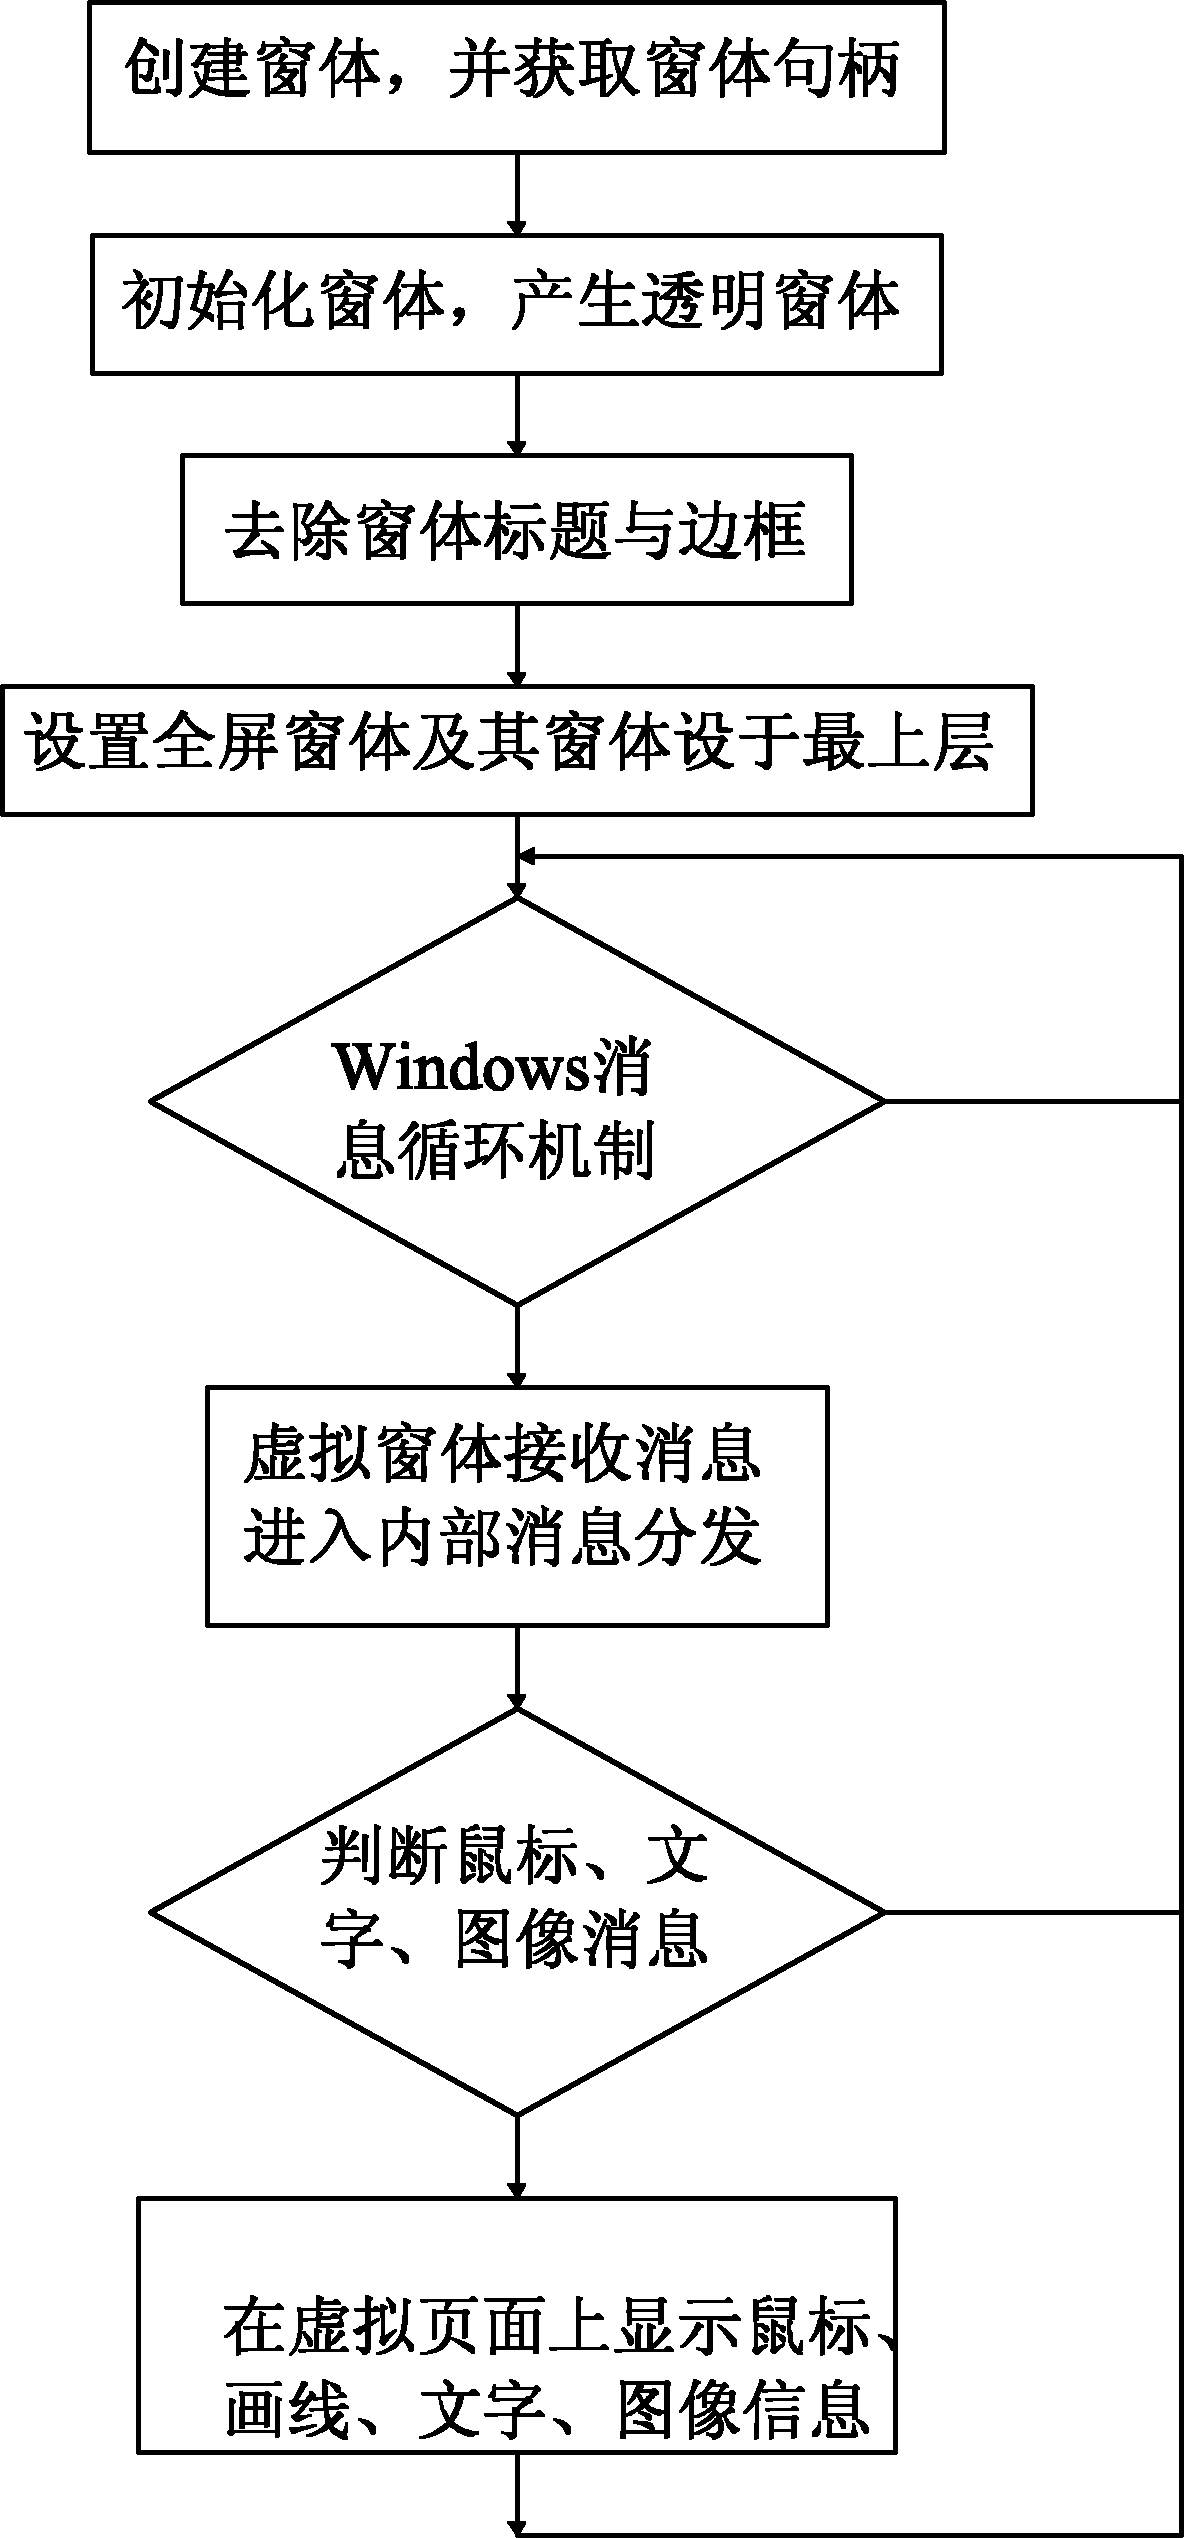 Method for realizing virtual page in Windows operating system